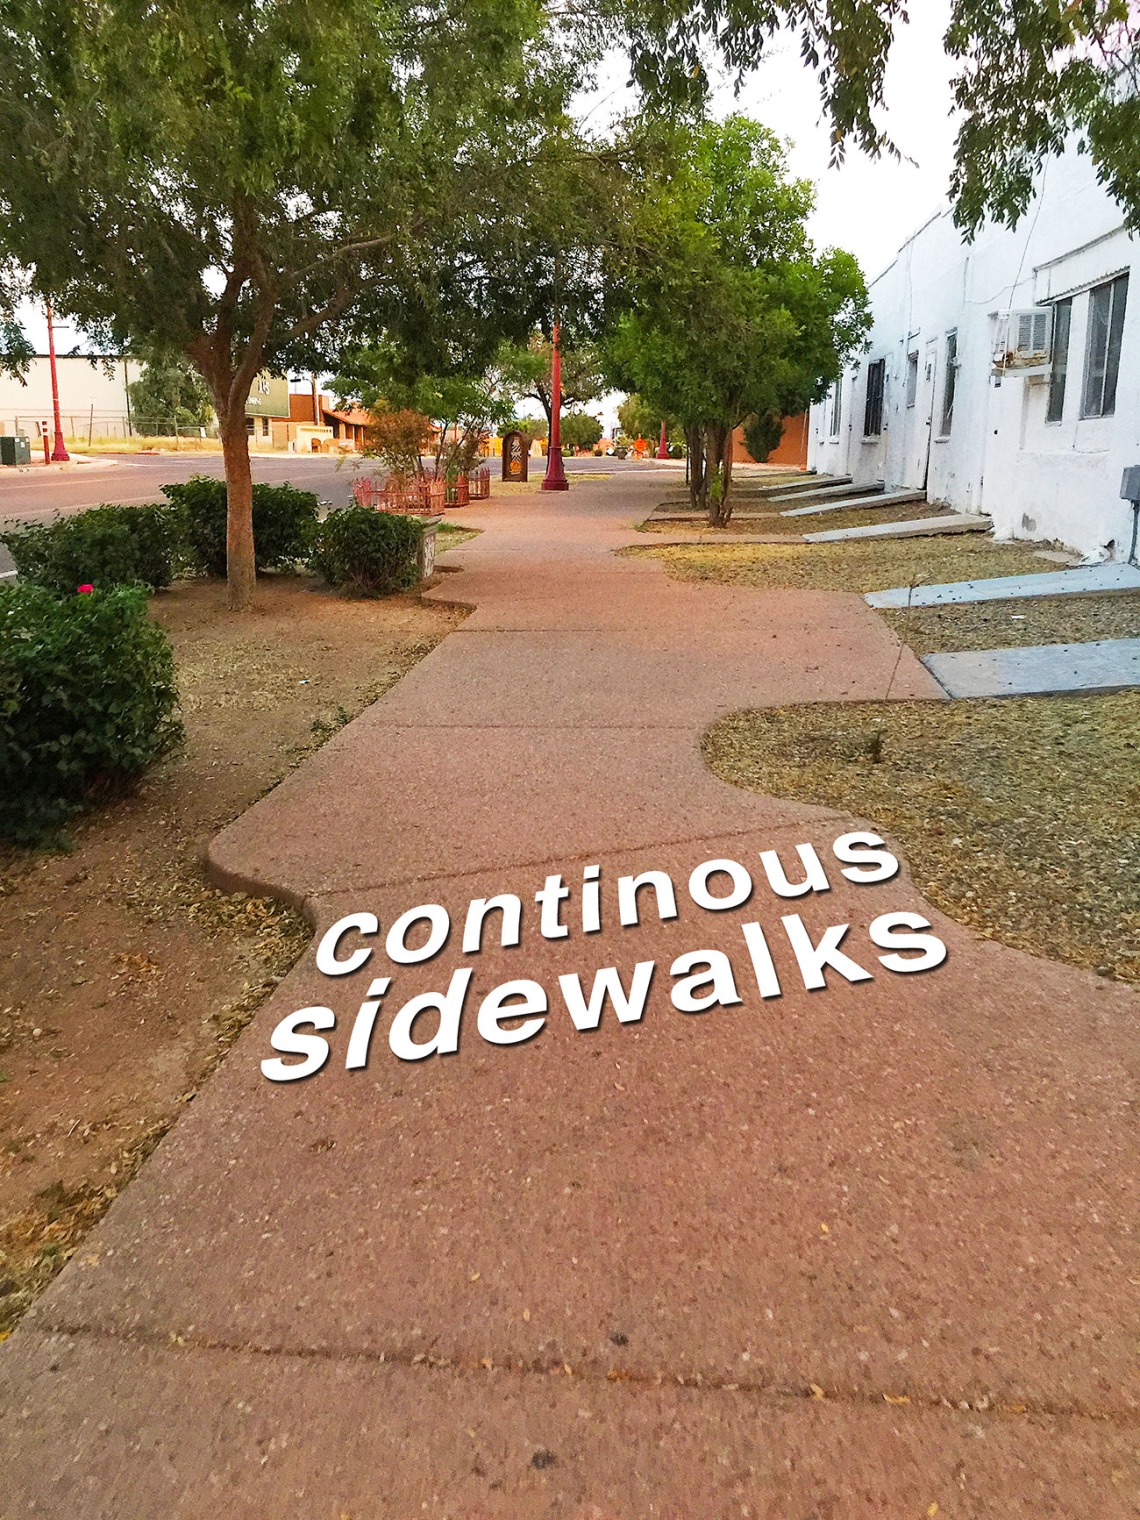 Continuous Sidewalks: Walkability in Tucson, by Gabby Abou-Zeid